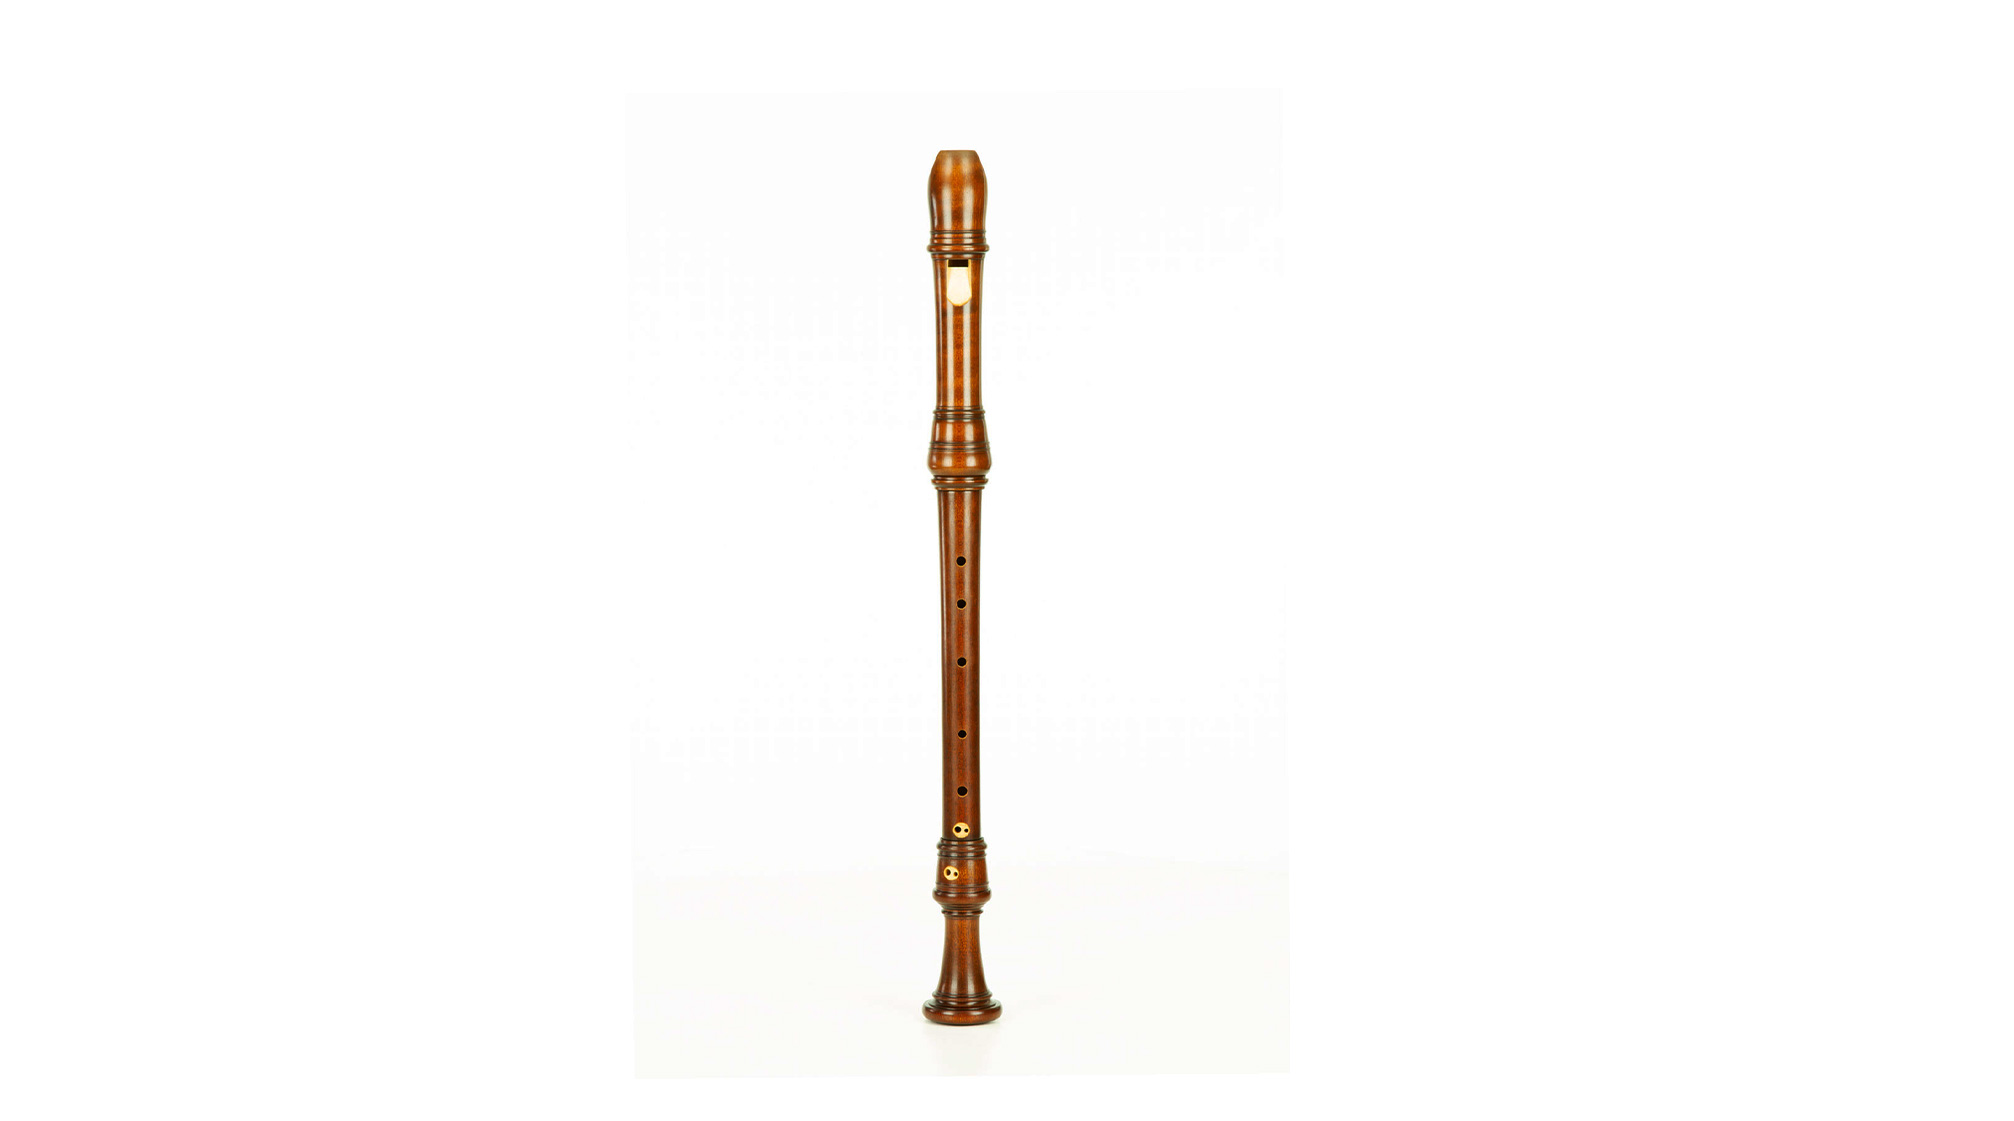 Takeyama, "Takeyama model", Voice Flute in d', baroque double hole, 415 Hz, Jap. maple stained